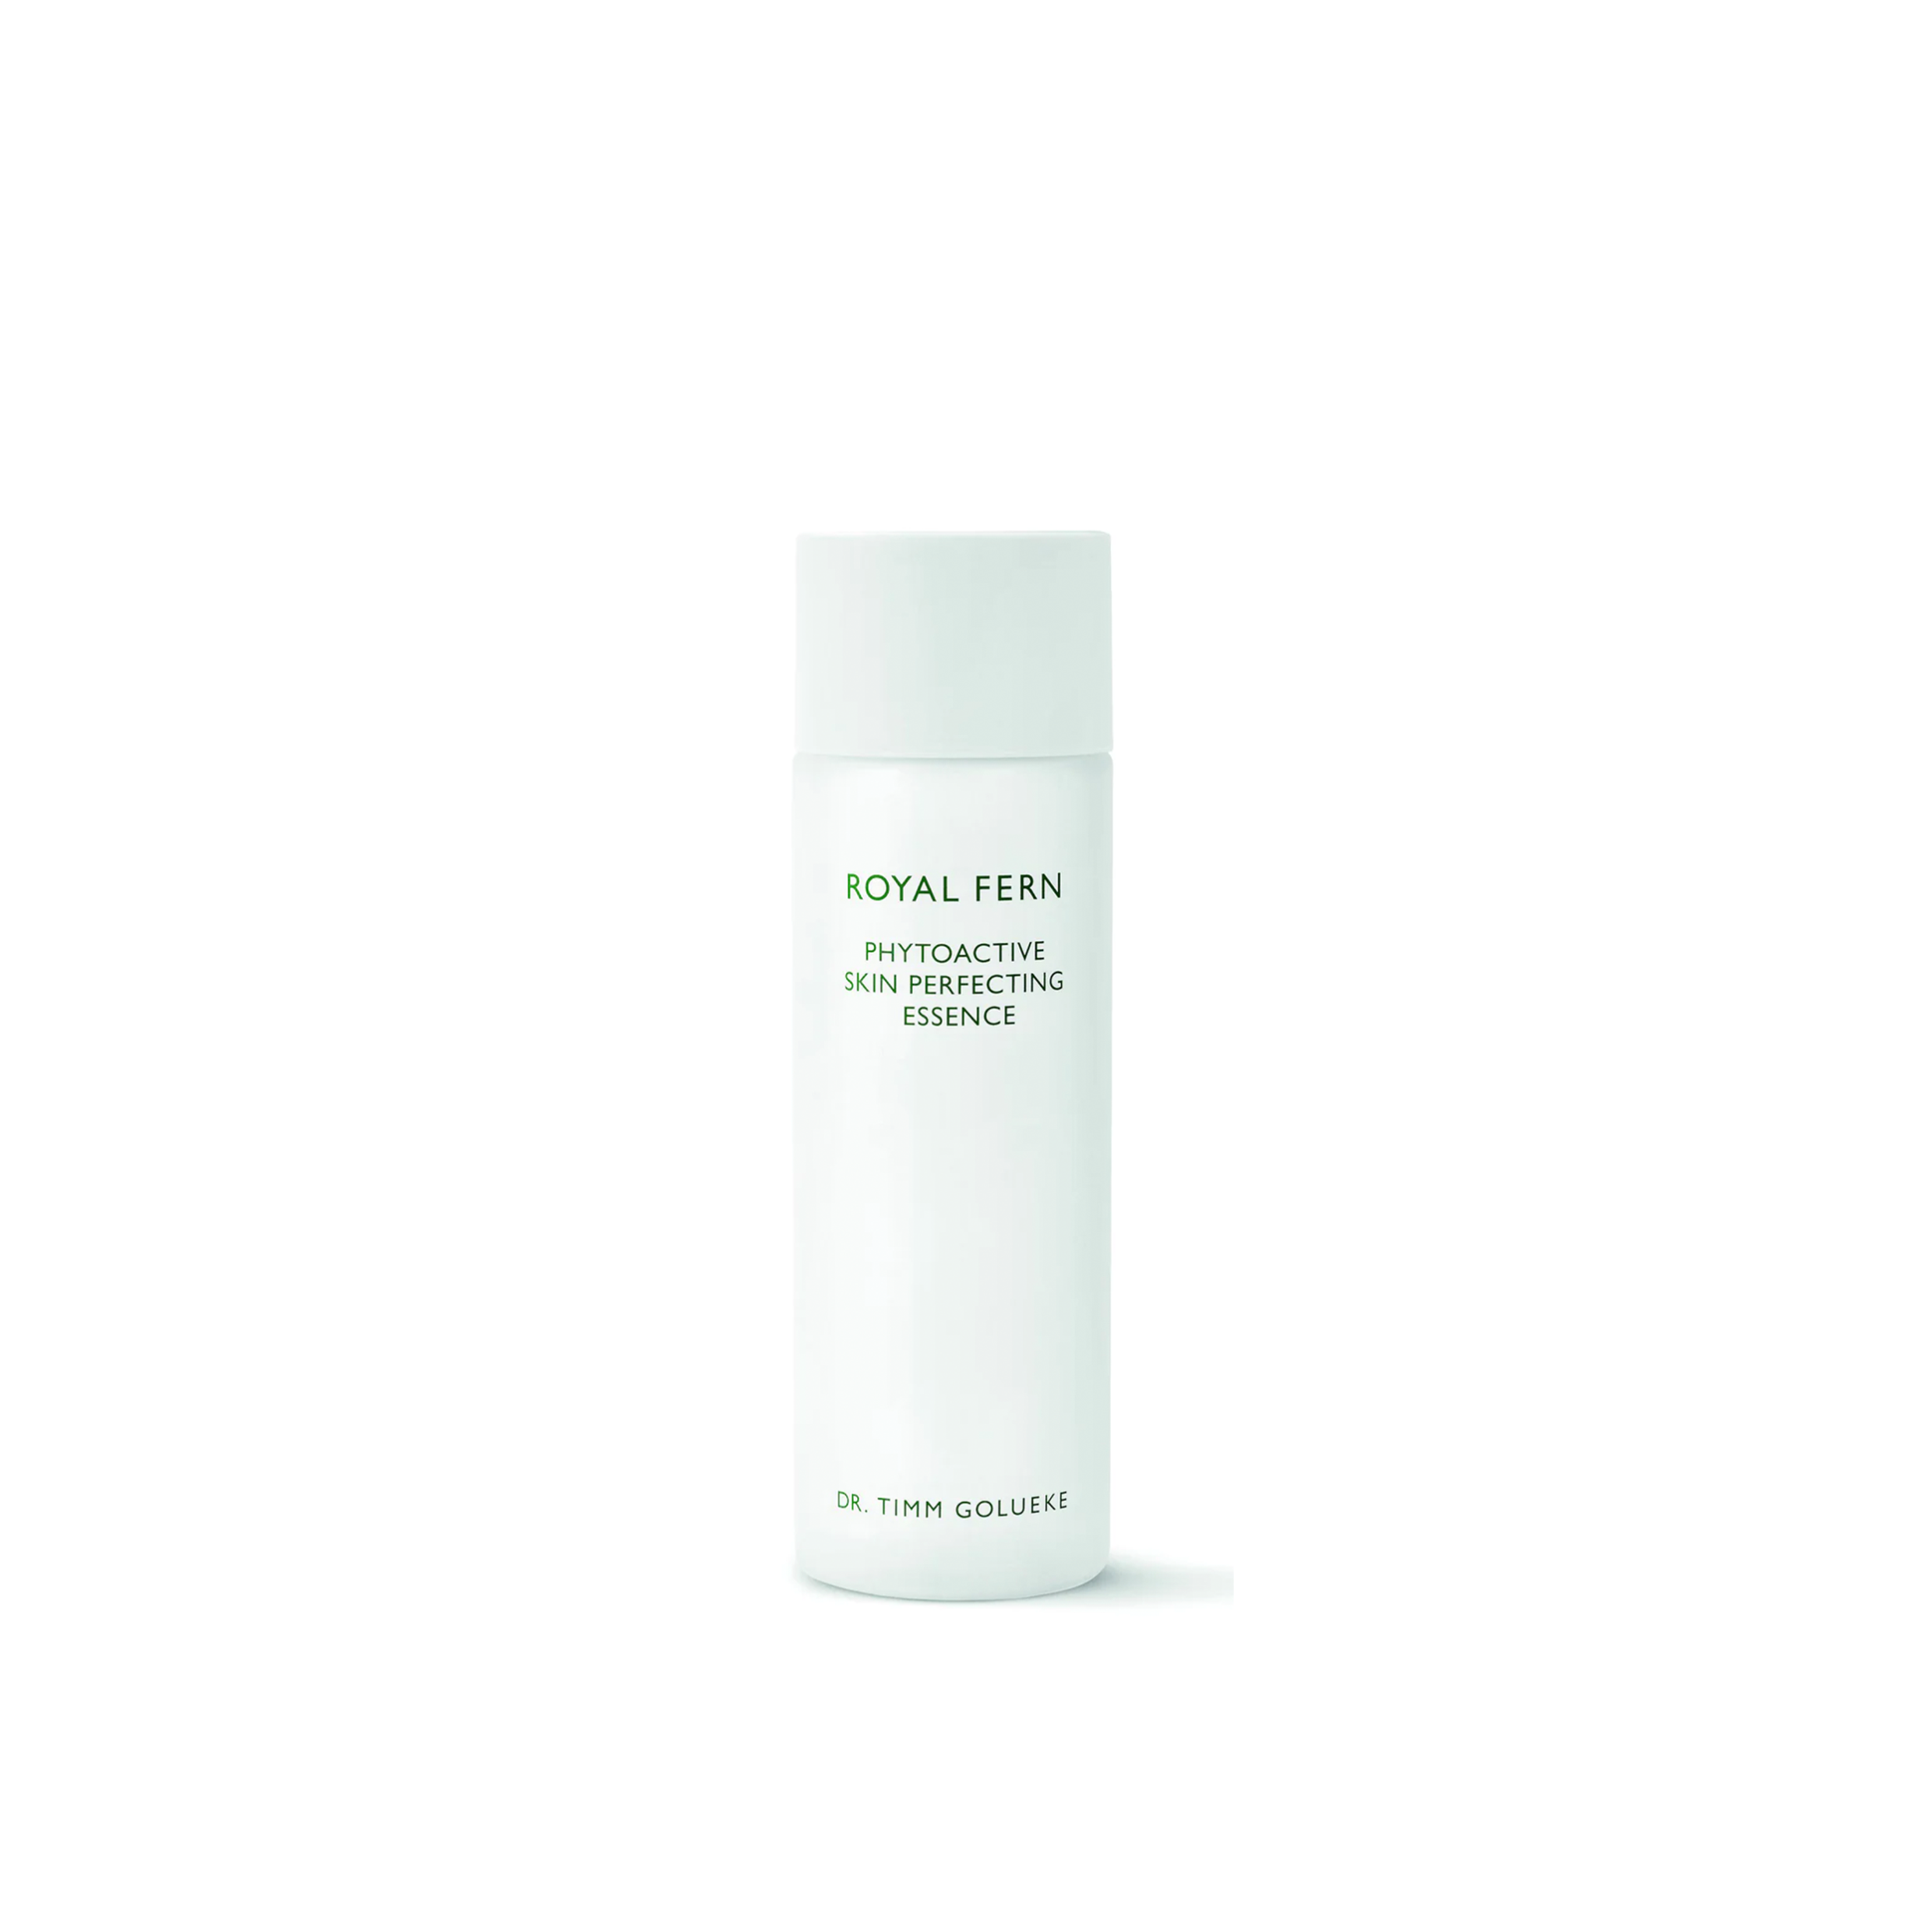 ROYAL FERN Phytoactive Skin Perfecting Essence